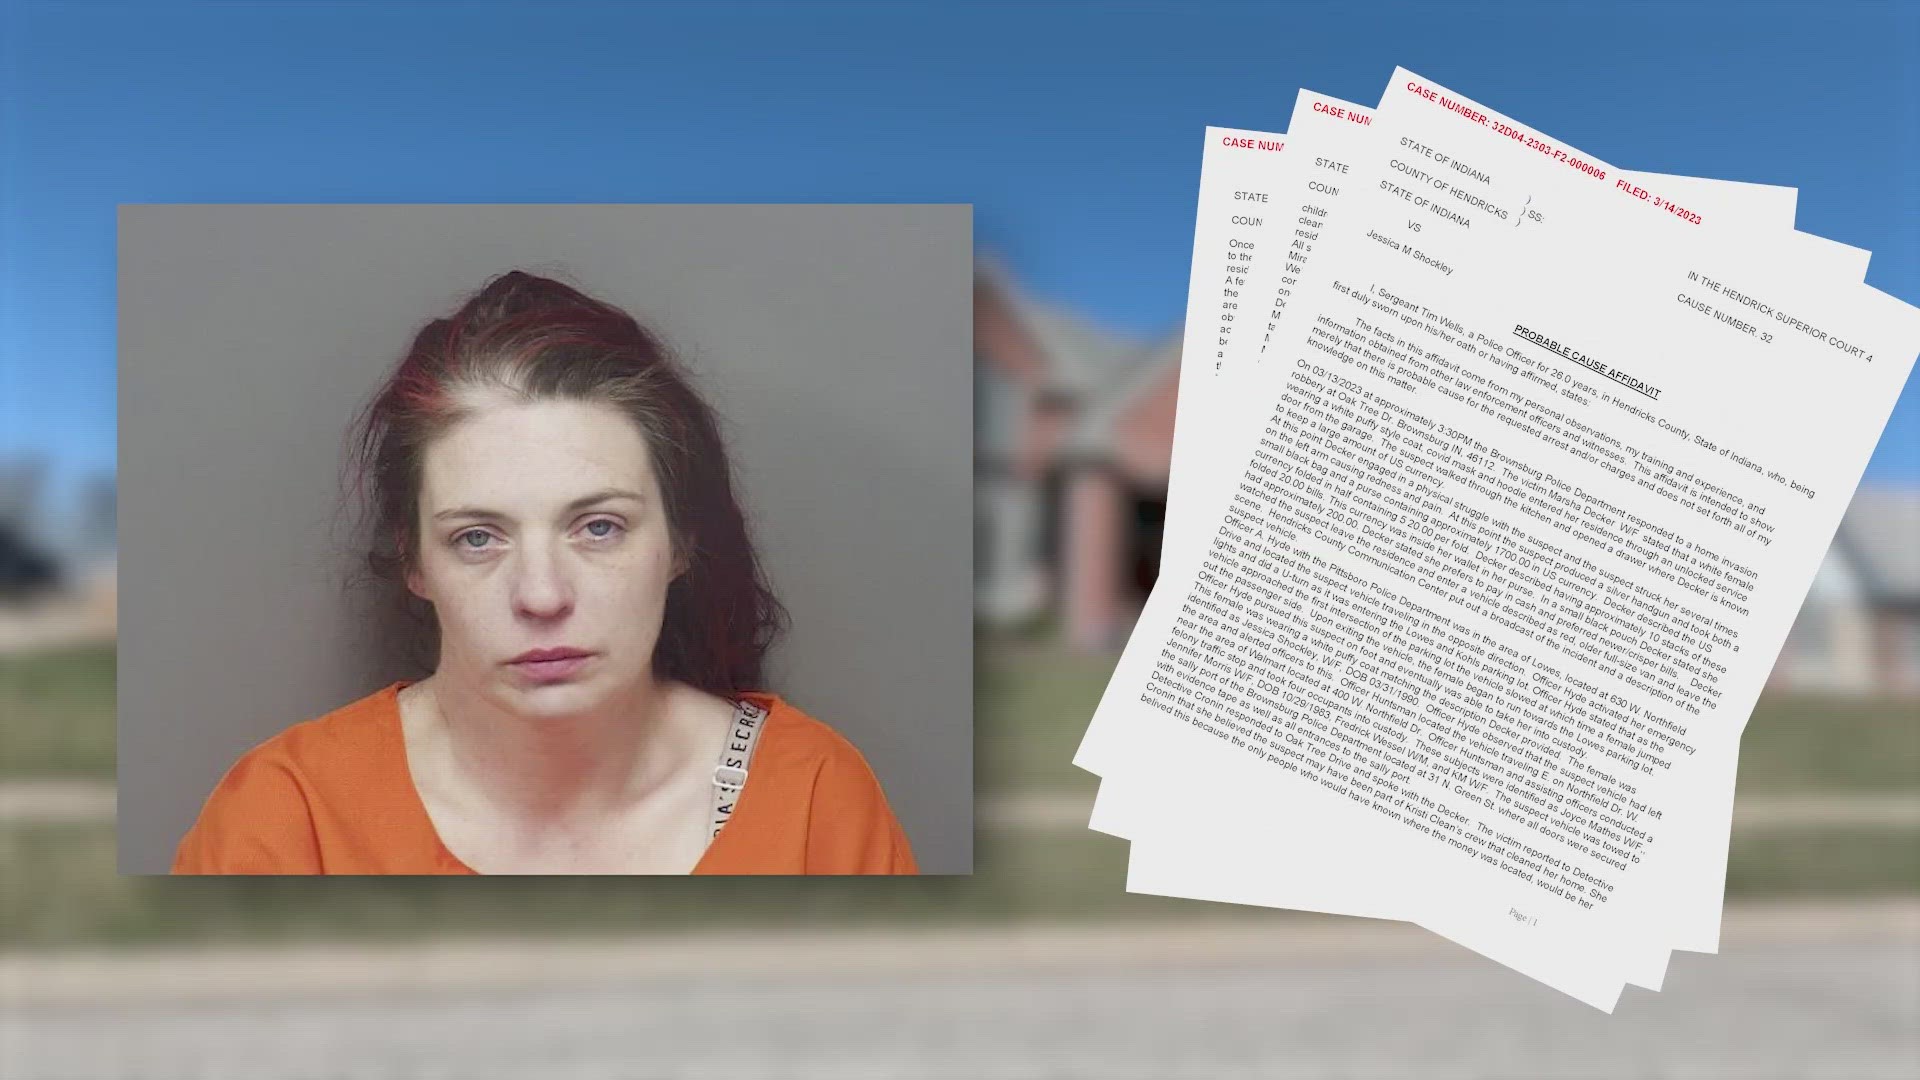 Jessica Shockley was hired to clean the house for about a year.  After she was fired, she returned to the home and stole money.